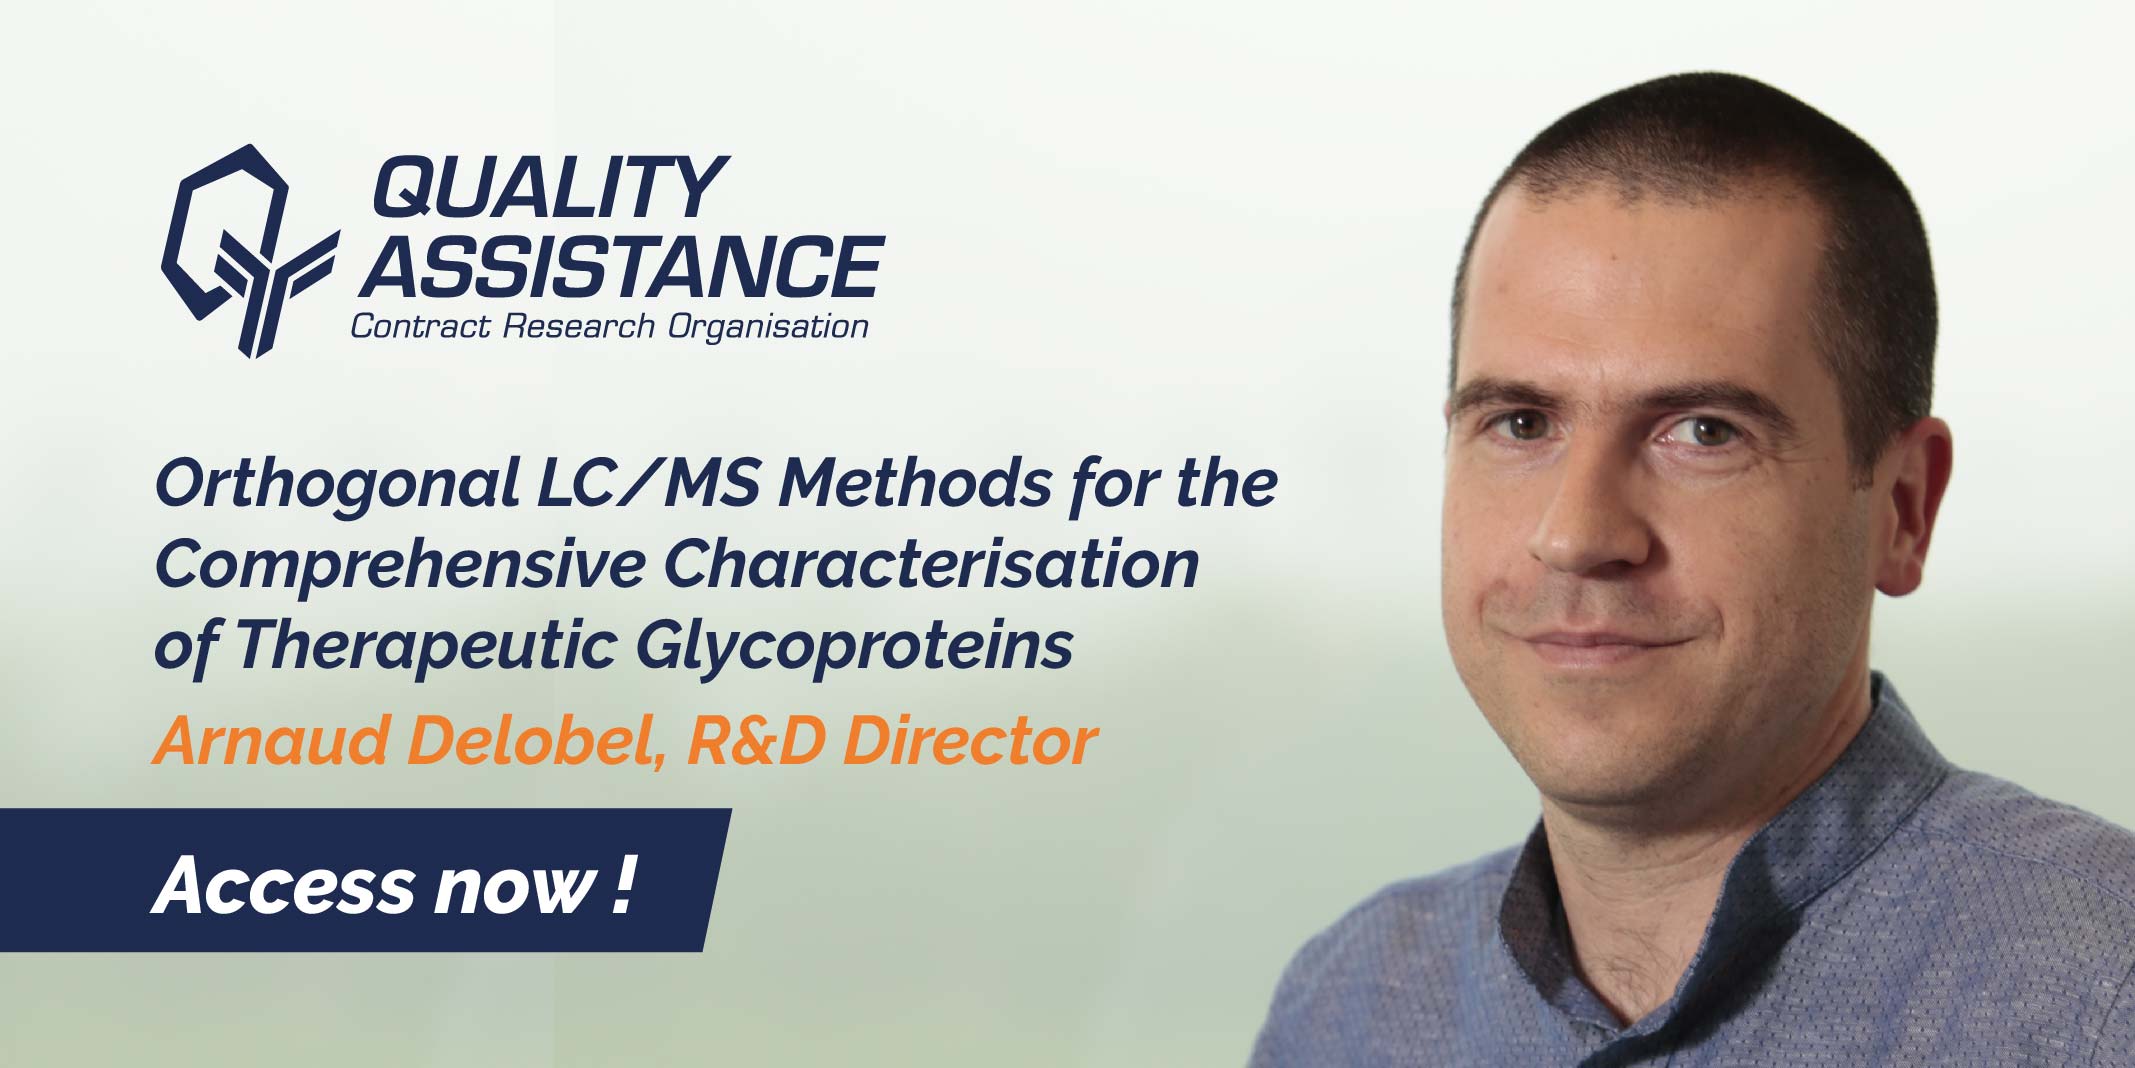  Orthogonal LCMS methods for the comprehensive characterisation of therapeutic glycoproteins